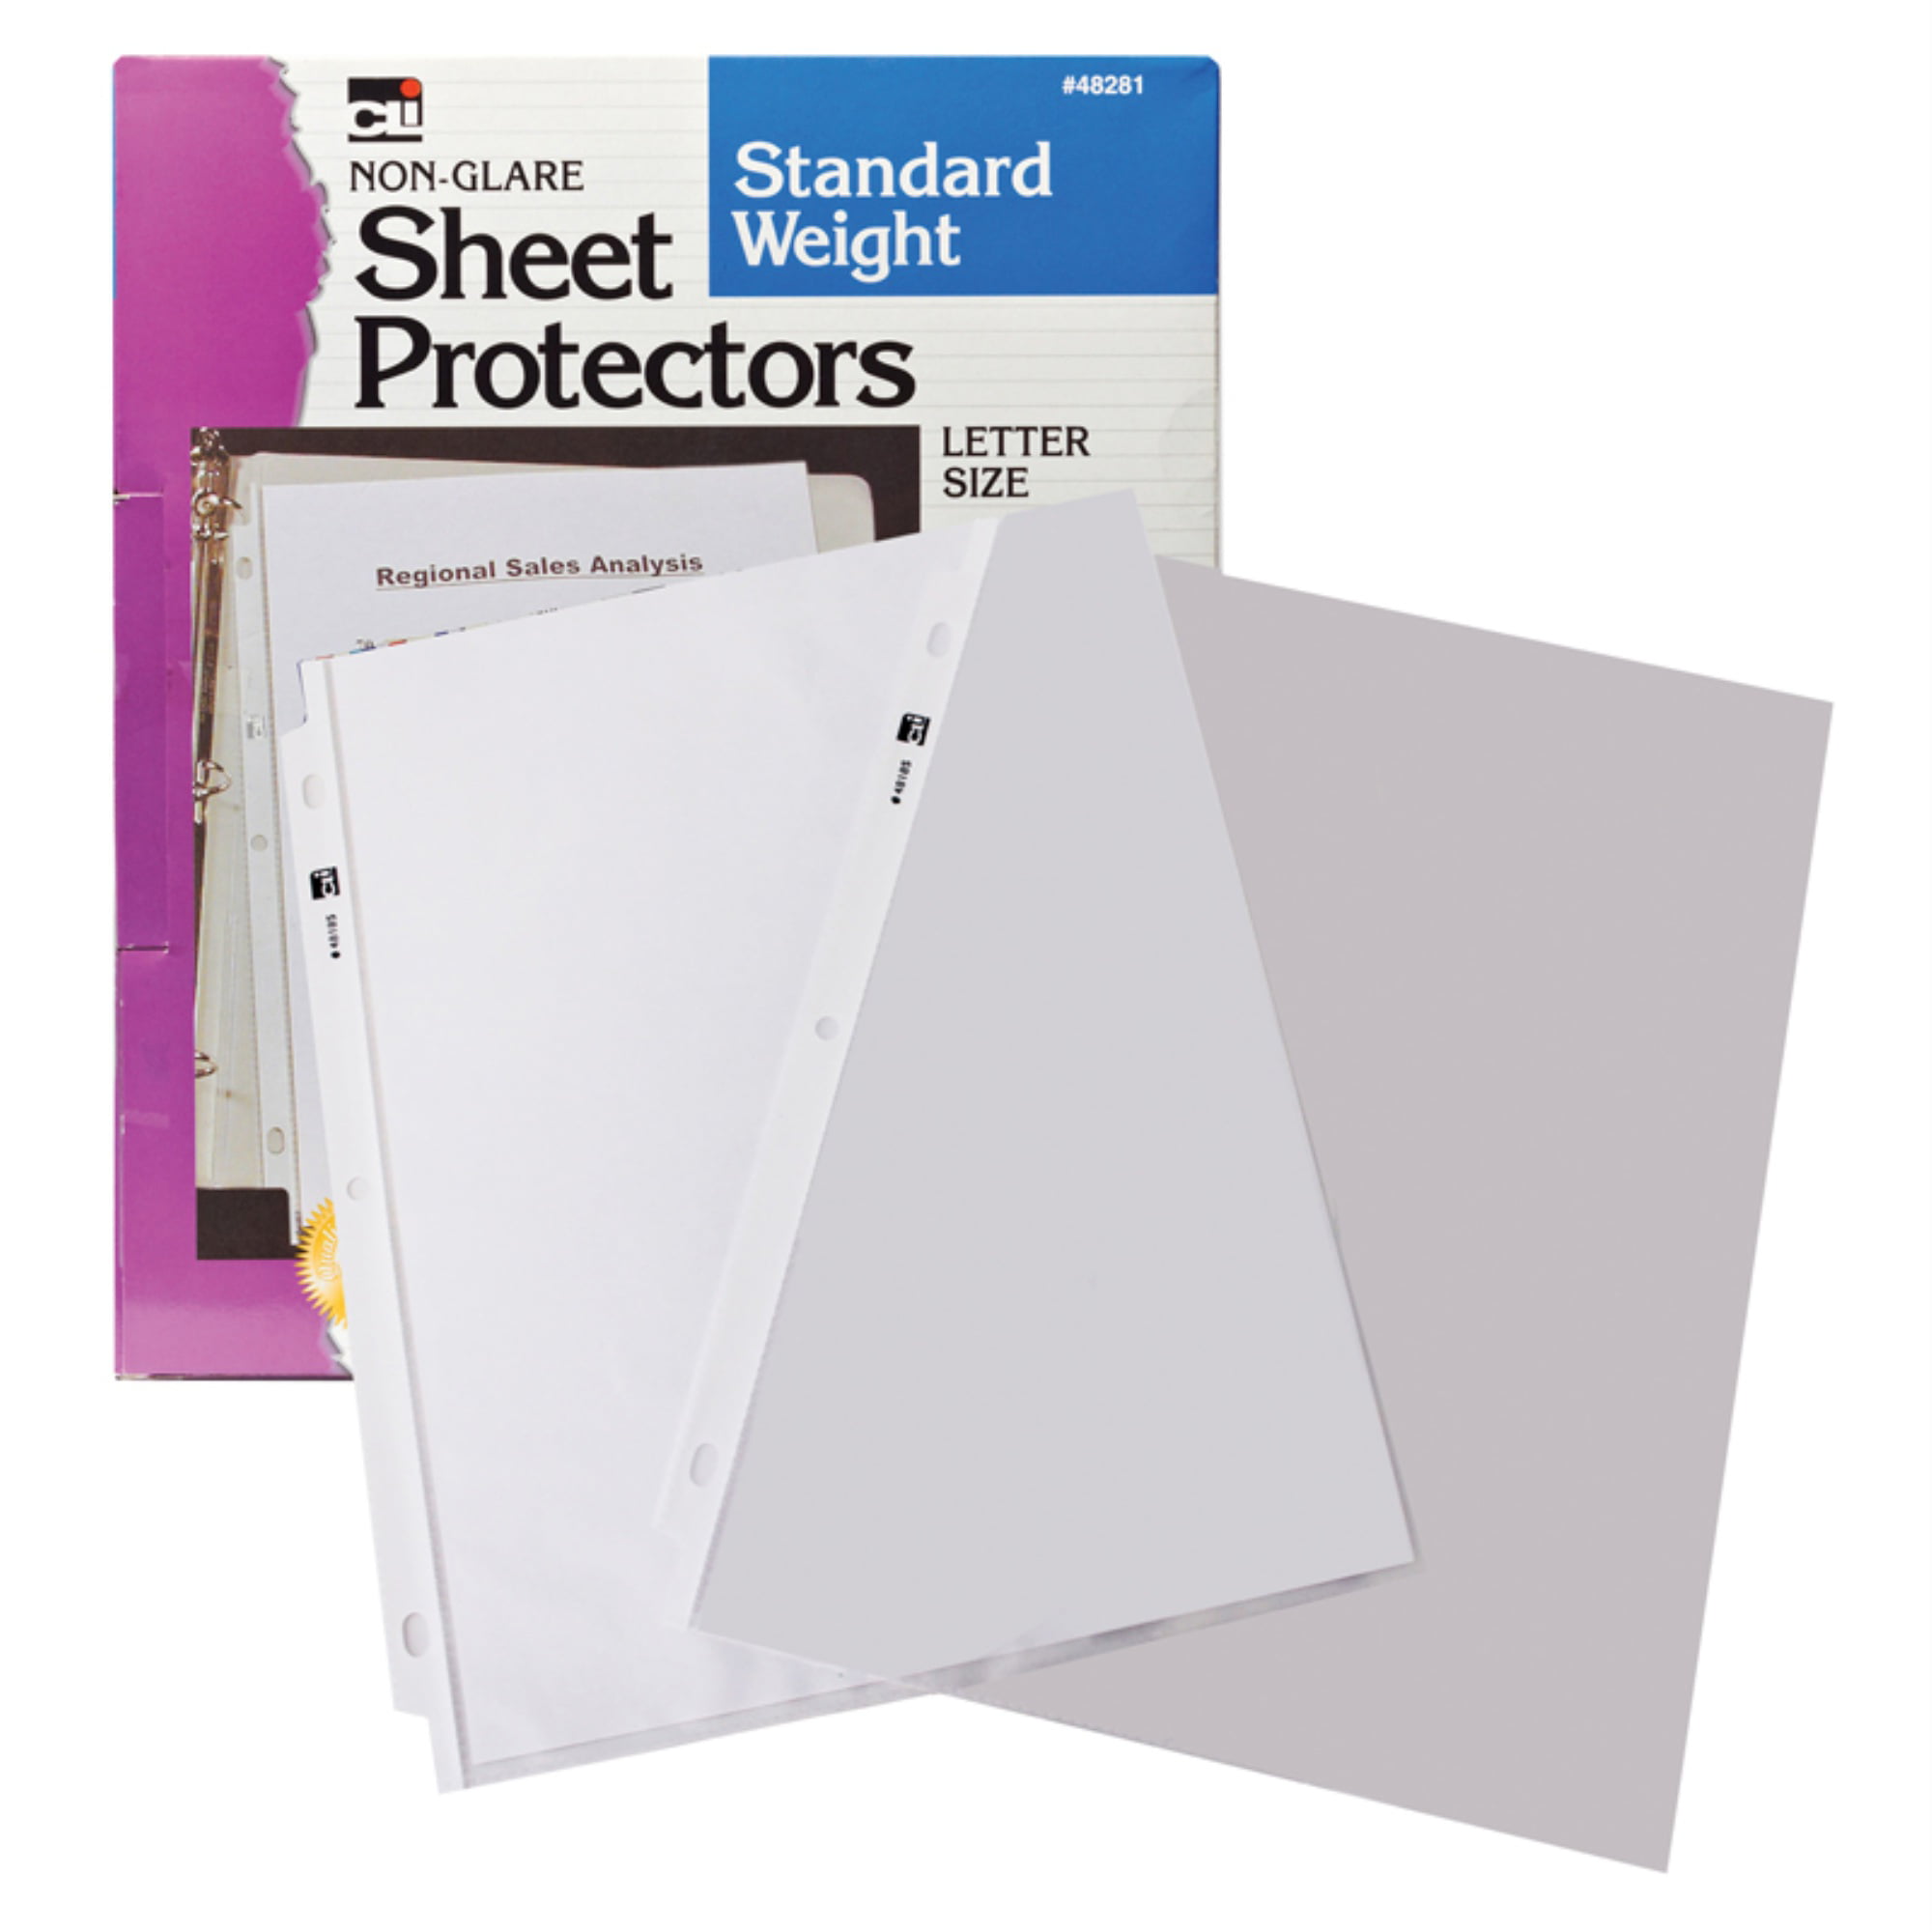 x 11in Box of 50 Office Depot Non-Glare Standard Weight Sheet Protectors 491703 8 1/2in